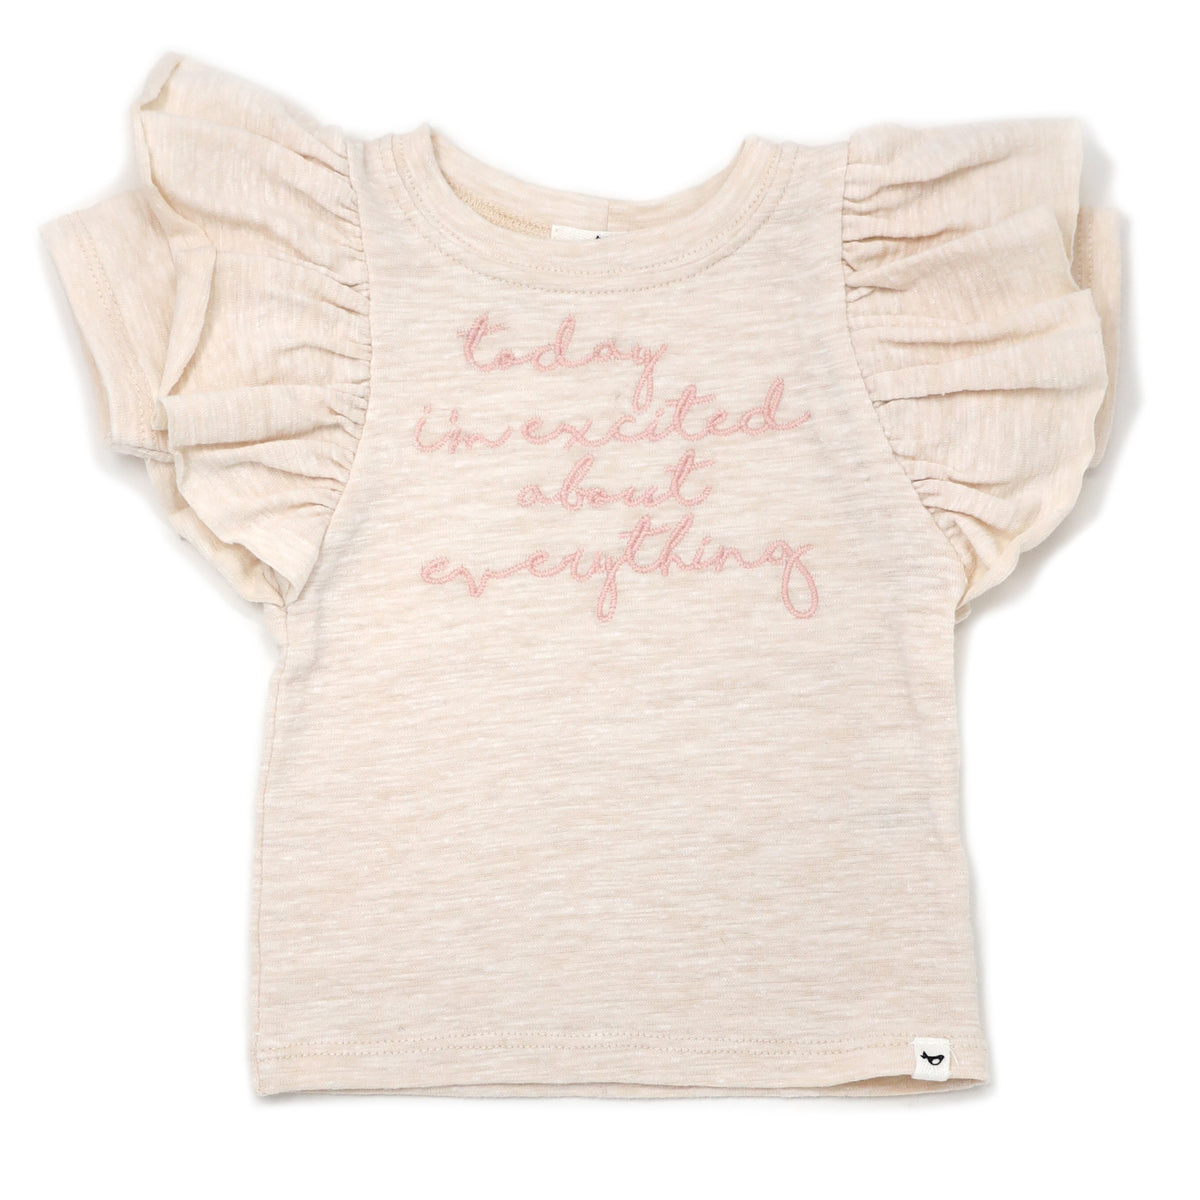 oh baby! Butterfly Short Sleeve Slub Tee -  "today i'm excited" Embroidery - Sand Heather